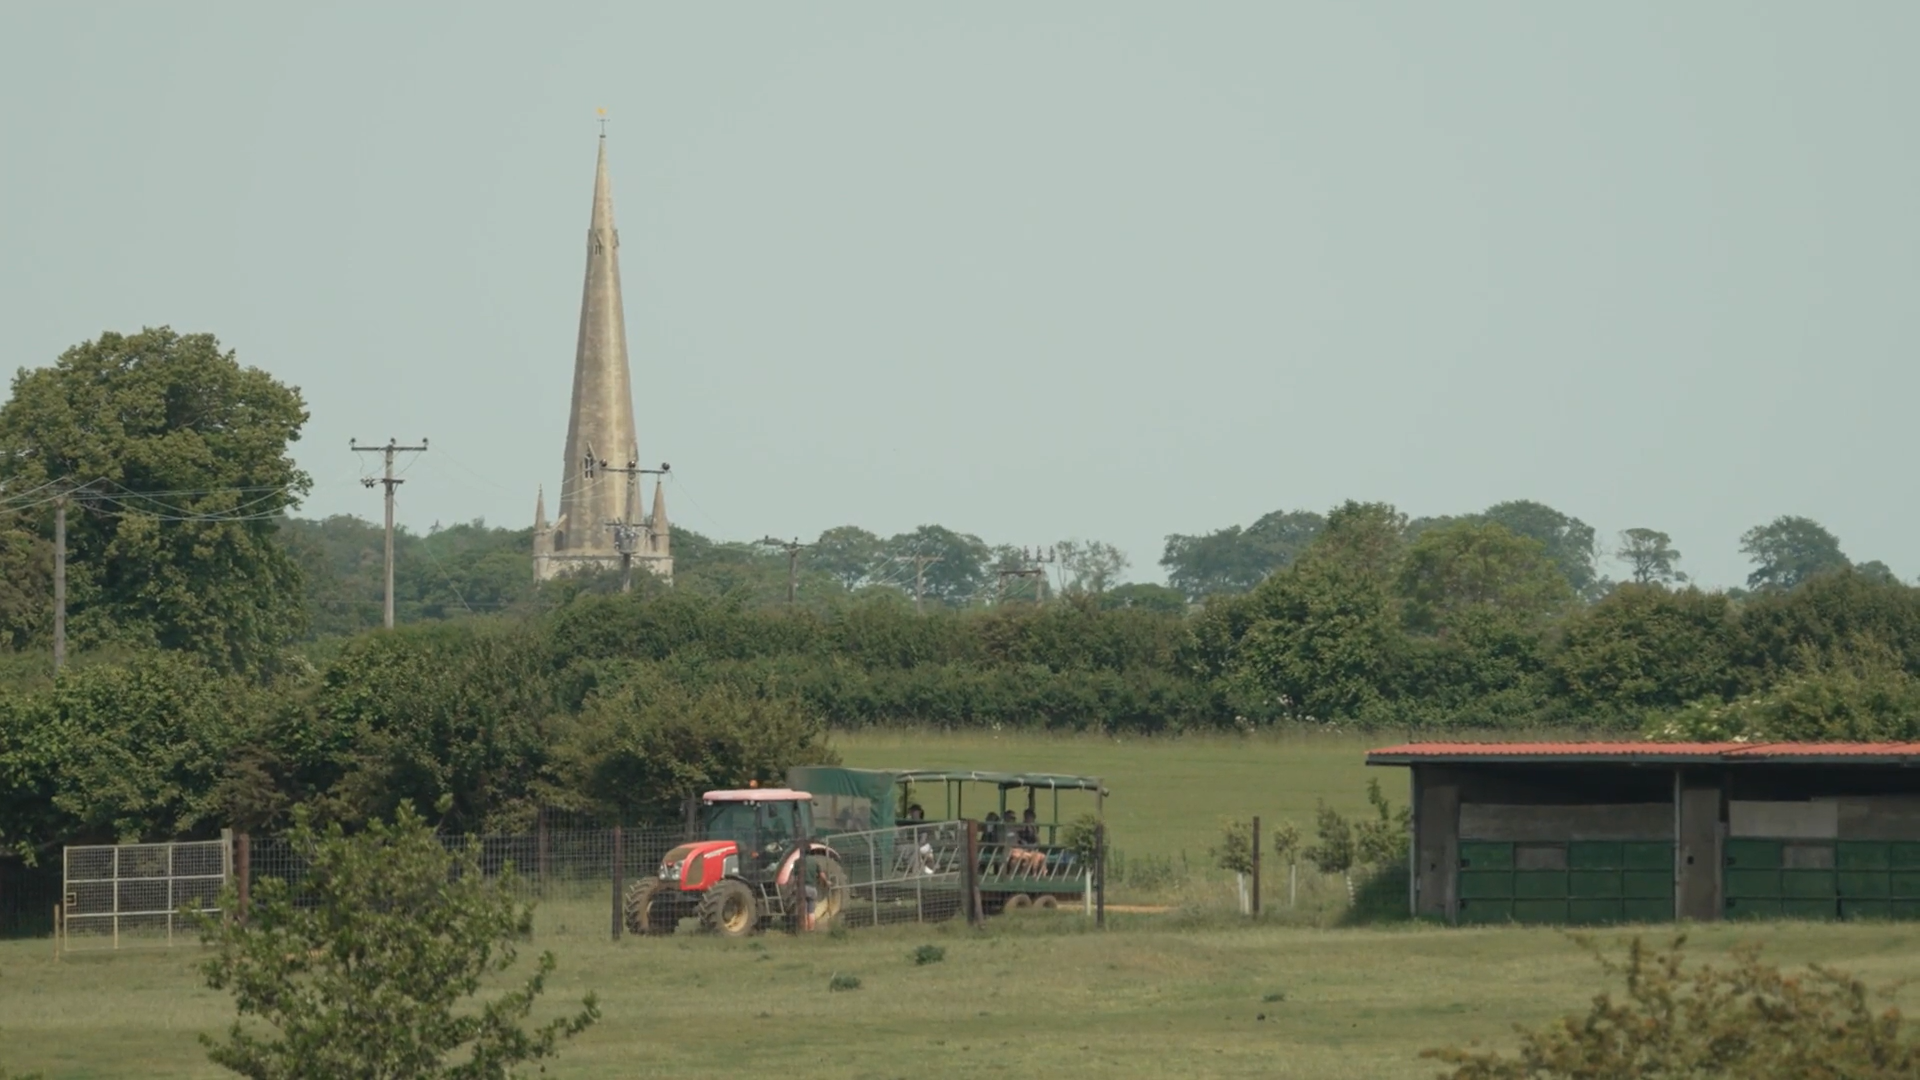 A tractor is plowing a field with a church in the background.